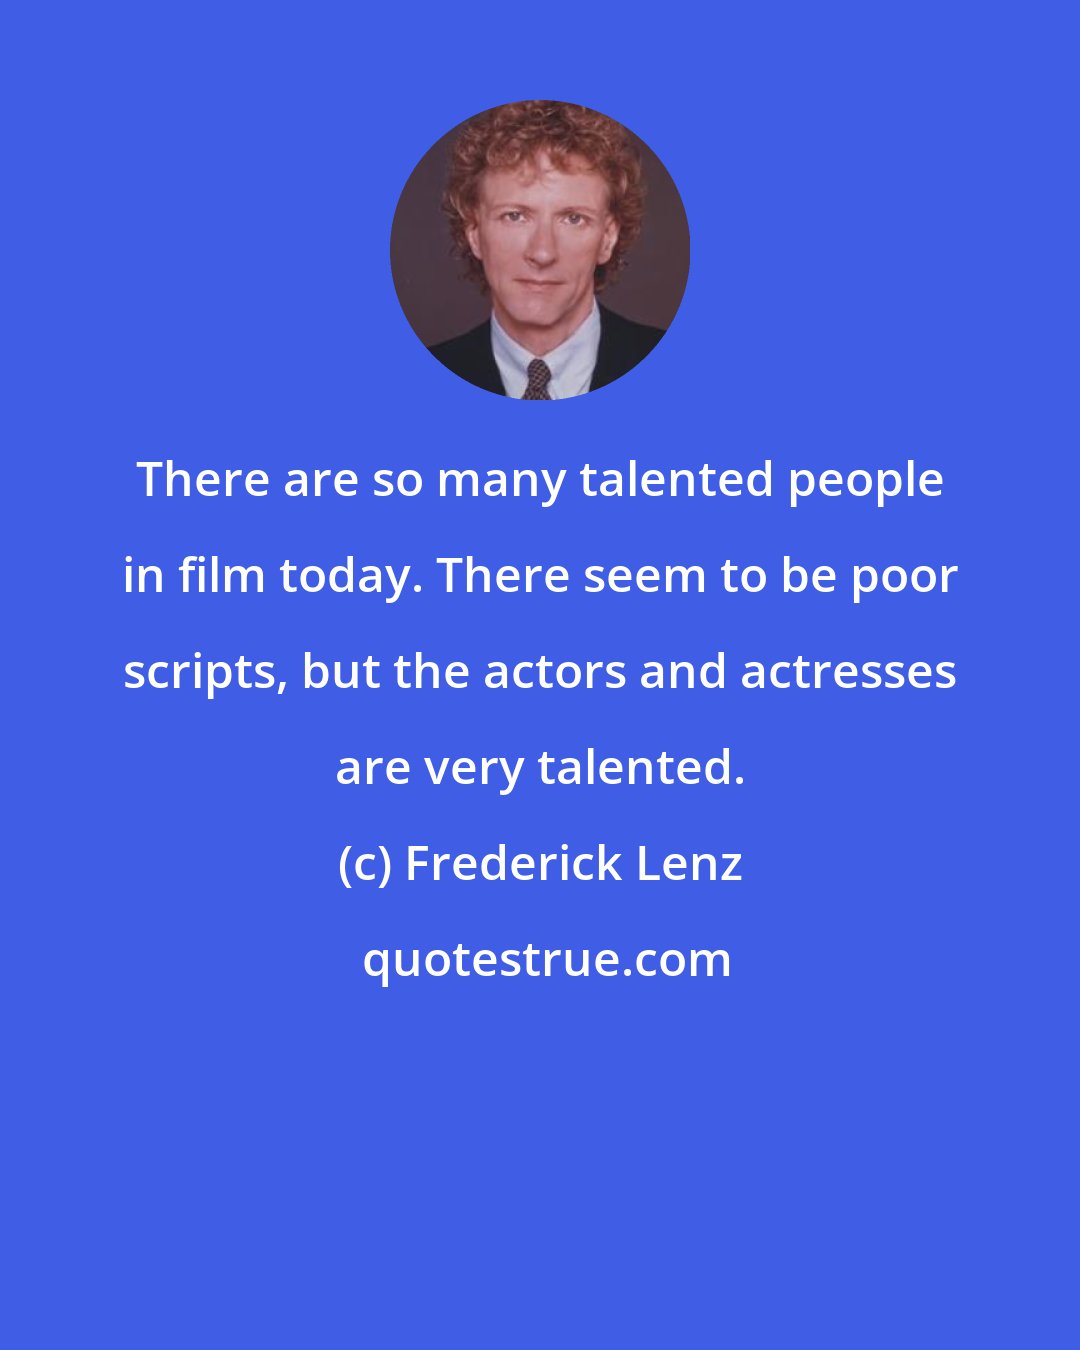 Frederick Lenz: There are so many talented people in film today. There seem to be poor scripts, but the actors and actresses are very talented.